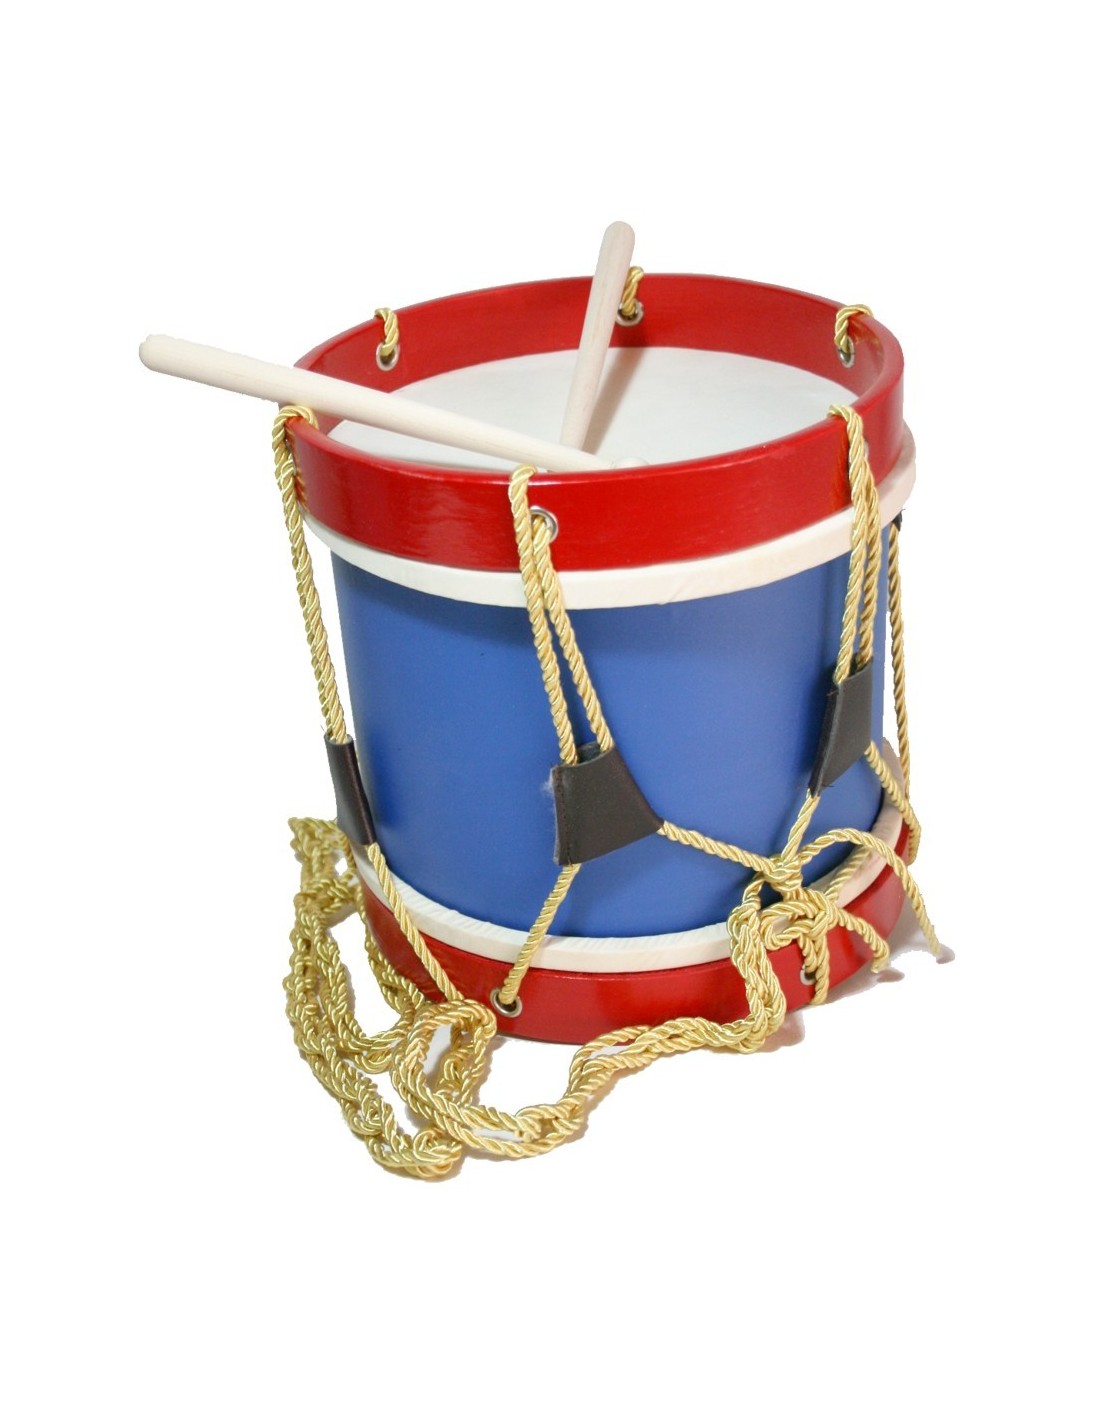 Drum Musical Band jouet musical traditionnel